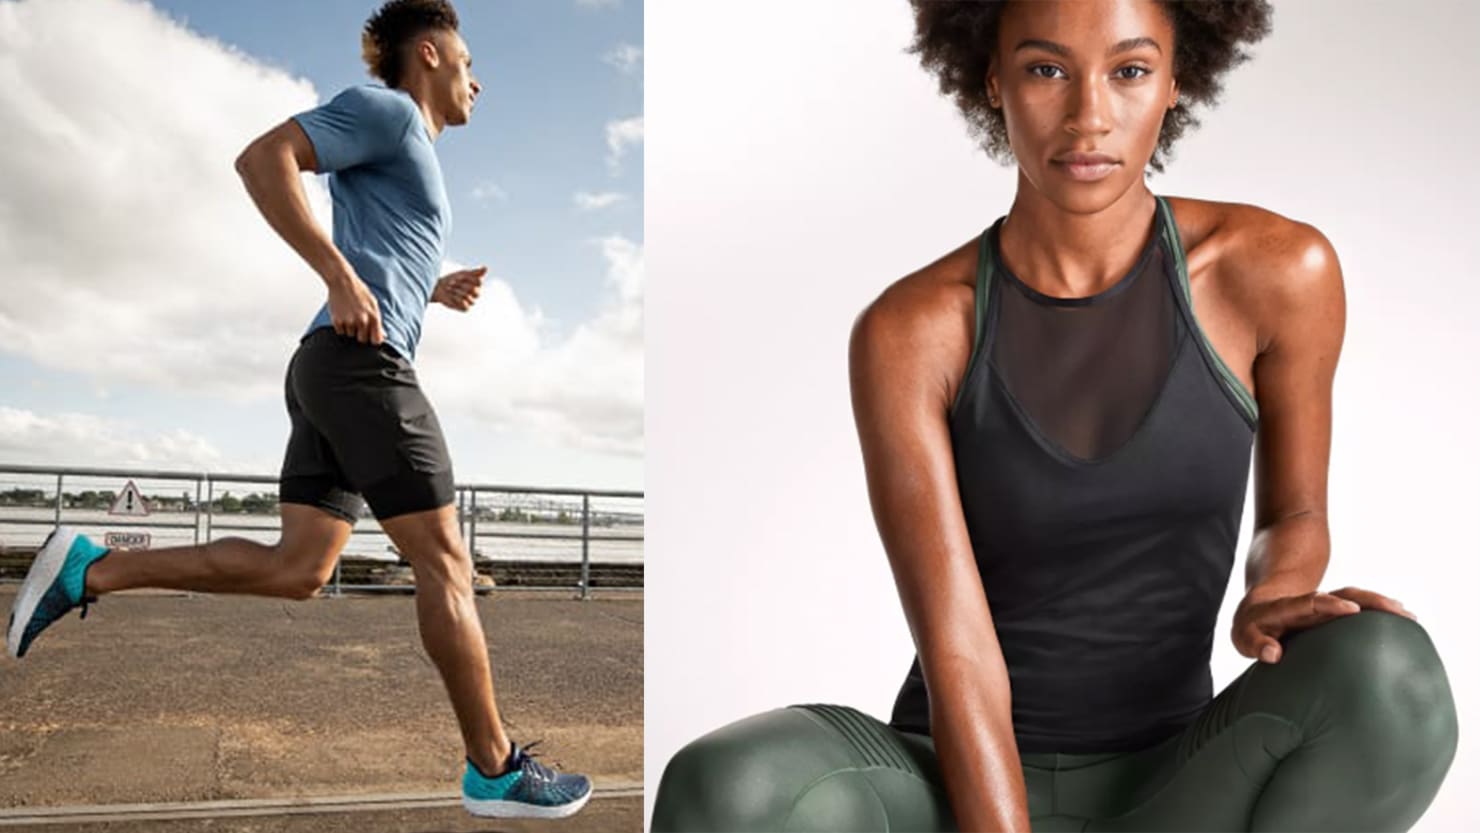 Shop New Balance Apparel on Sale and Get Extra 10% Off